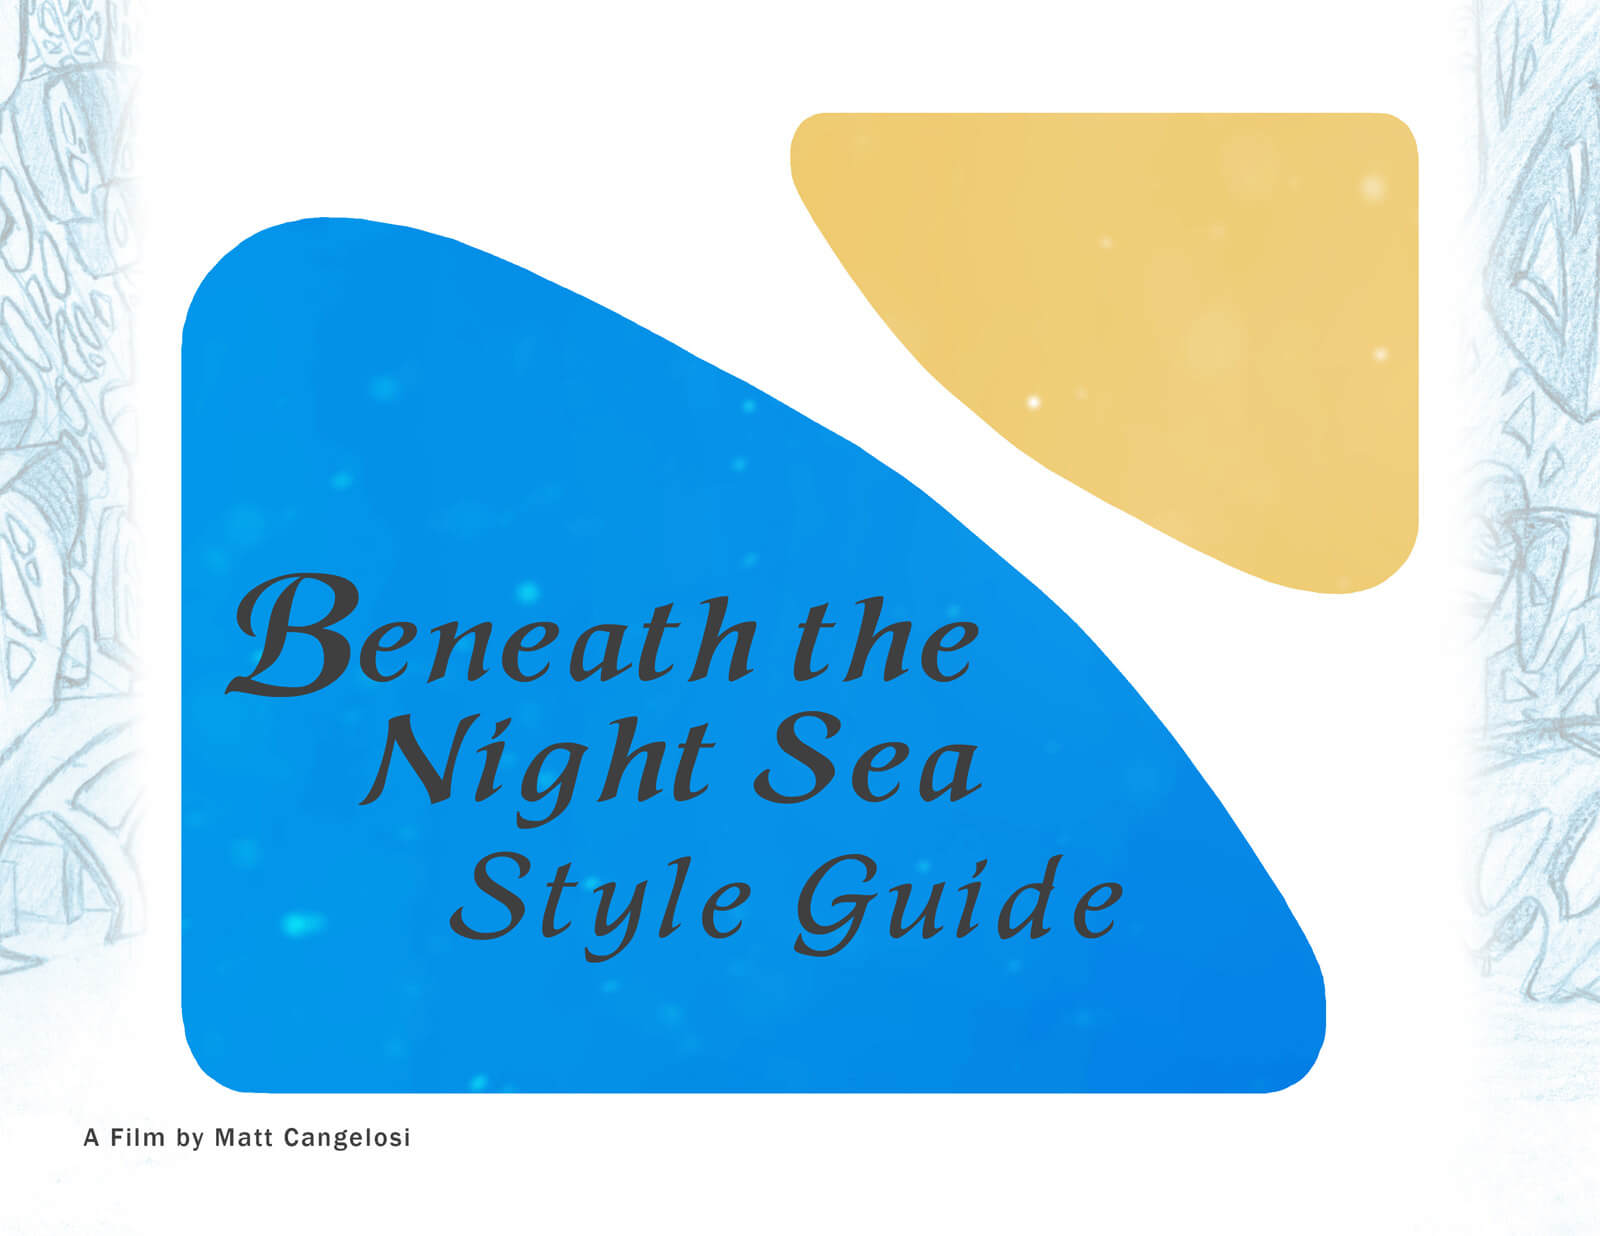 Presentation Slide labeled, "Style Guide for Beneath the Night Sea, a film by Matt Cangelosi"